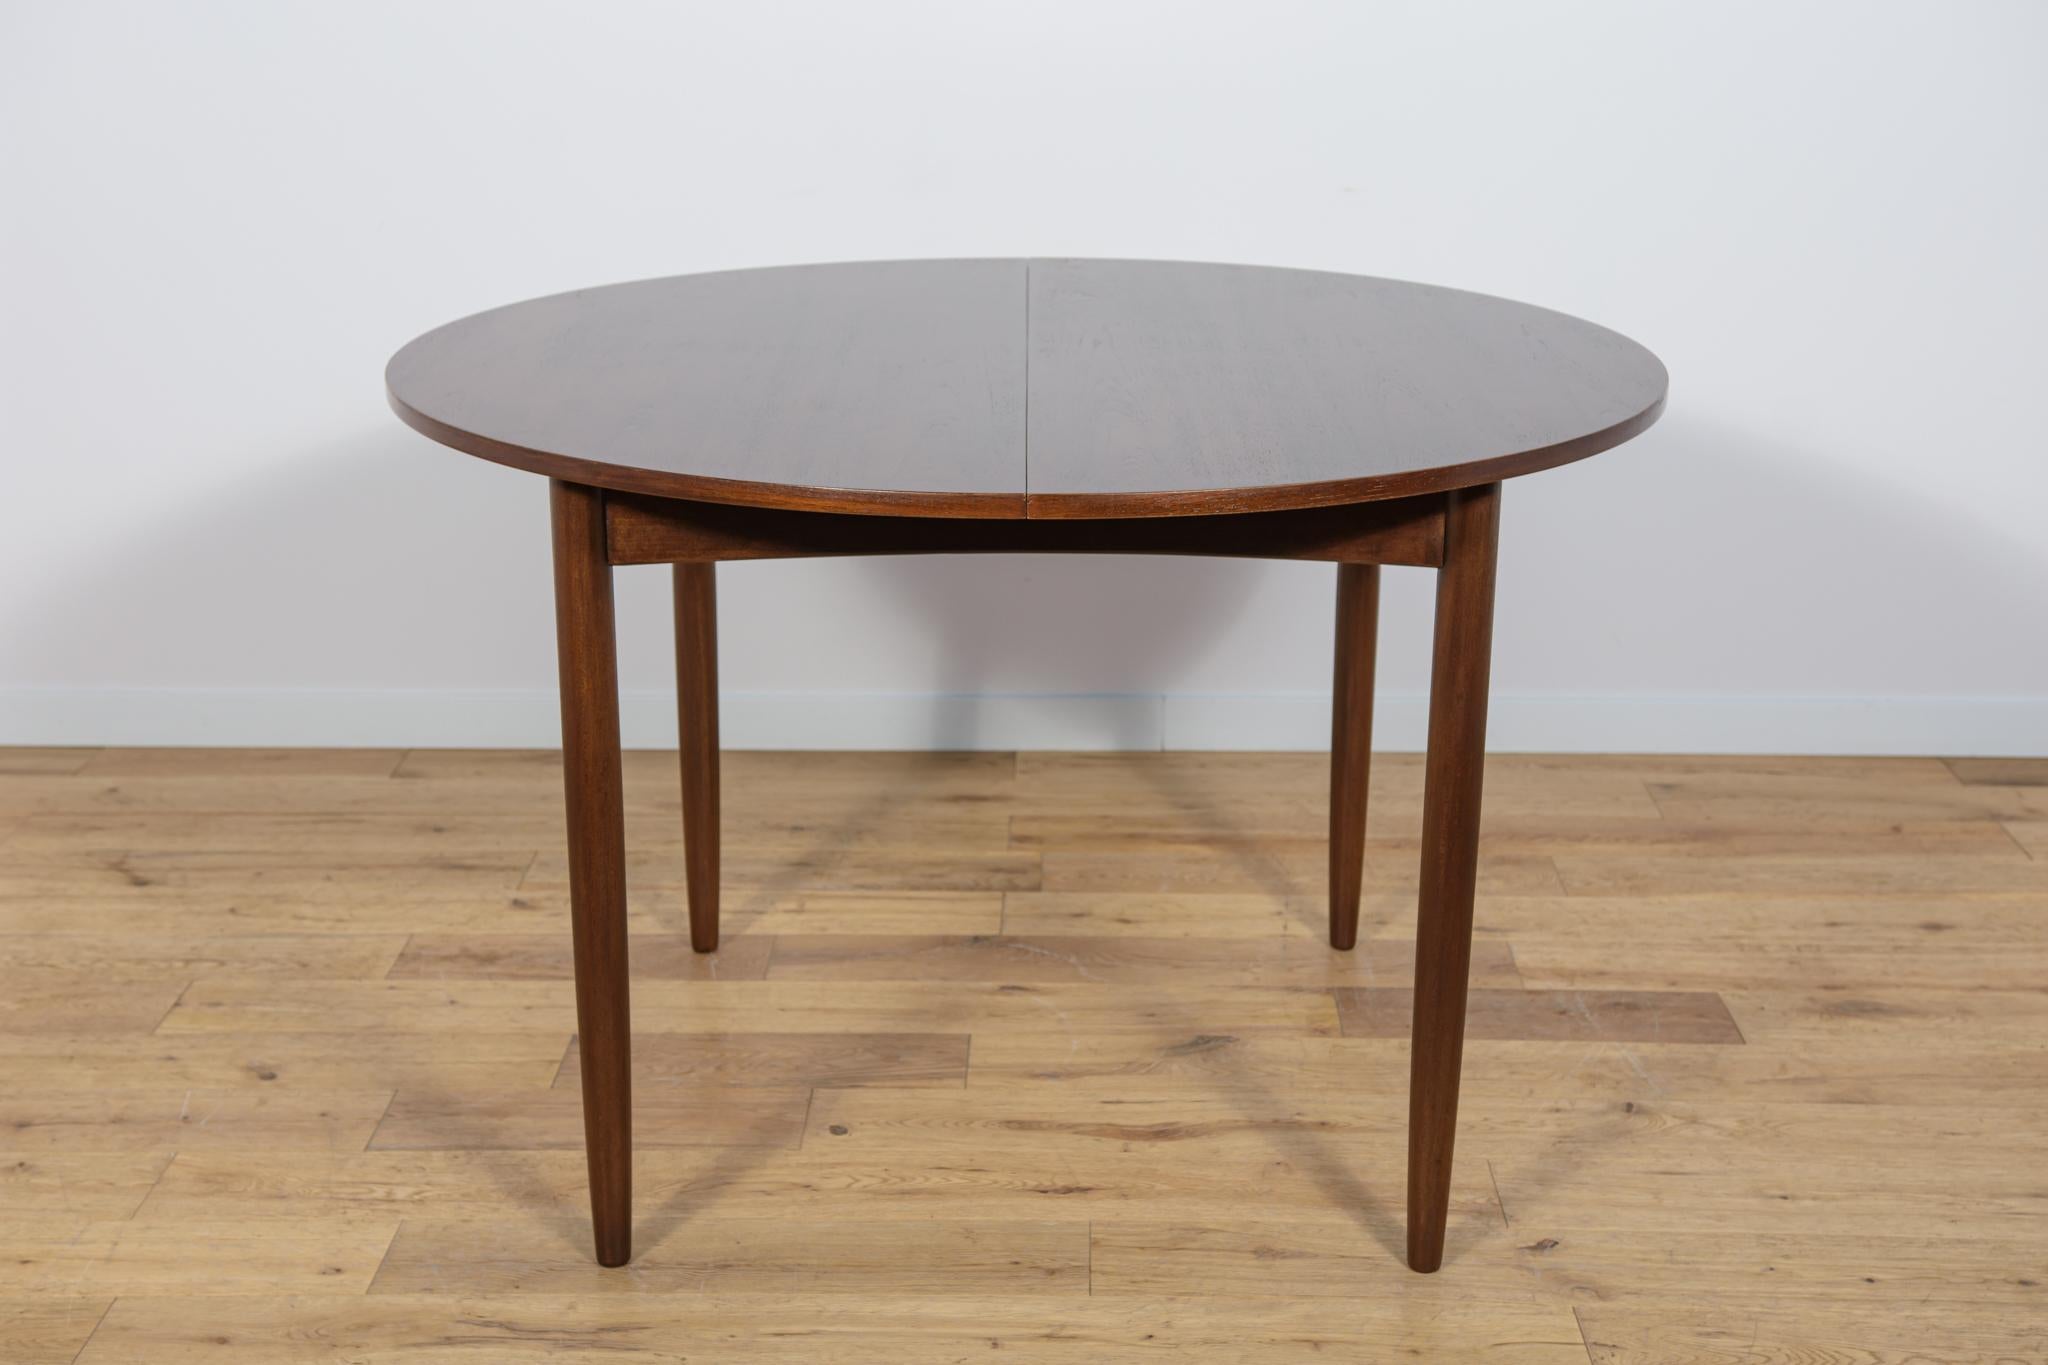 This round extendable dining table was produced by G-Plan in the 1960s. Teak elements cleaned from the old surface and painted in a oak stain and finished with strong lacquer. The table has a mechanism that makes it easy to unfold.

Additional